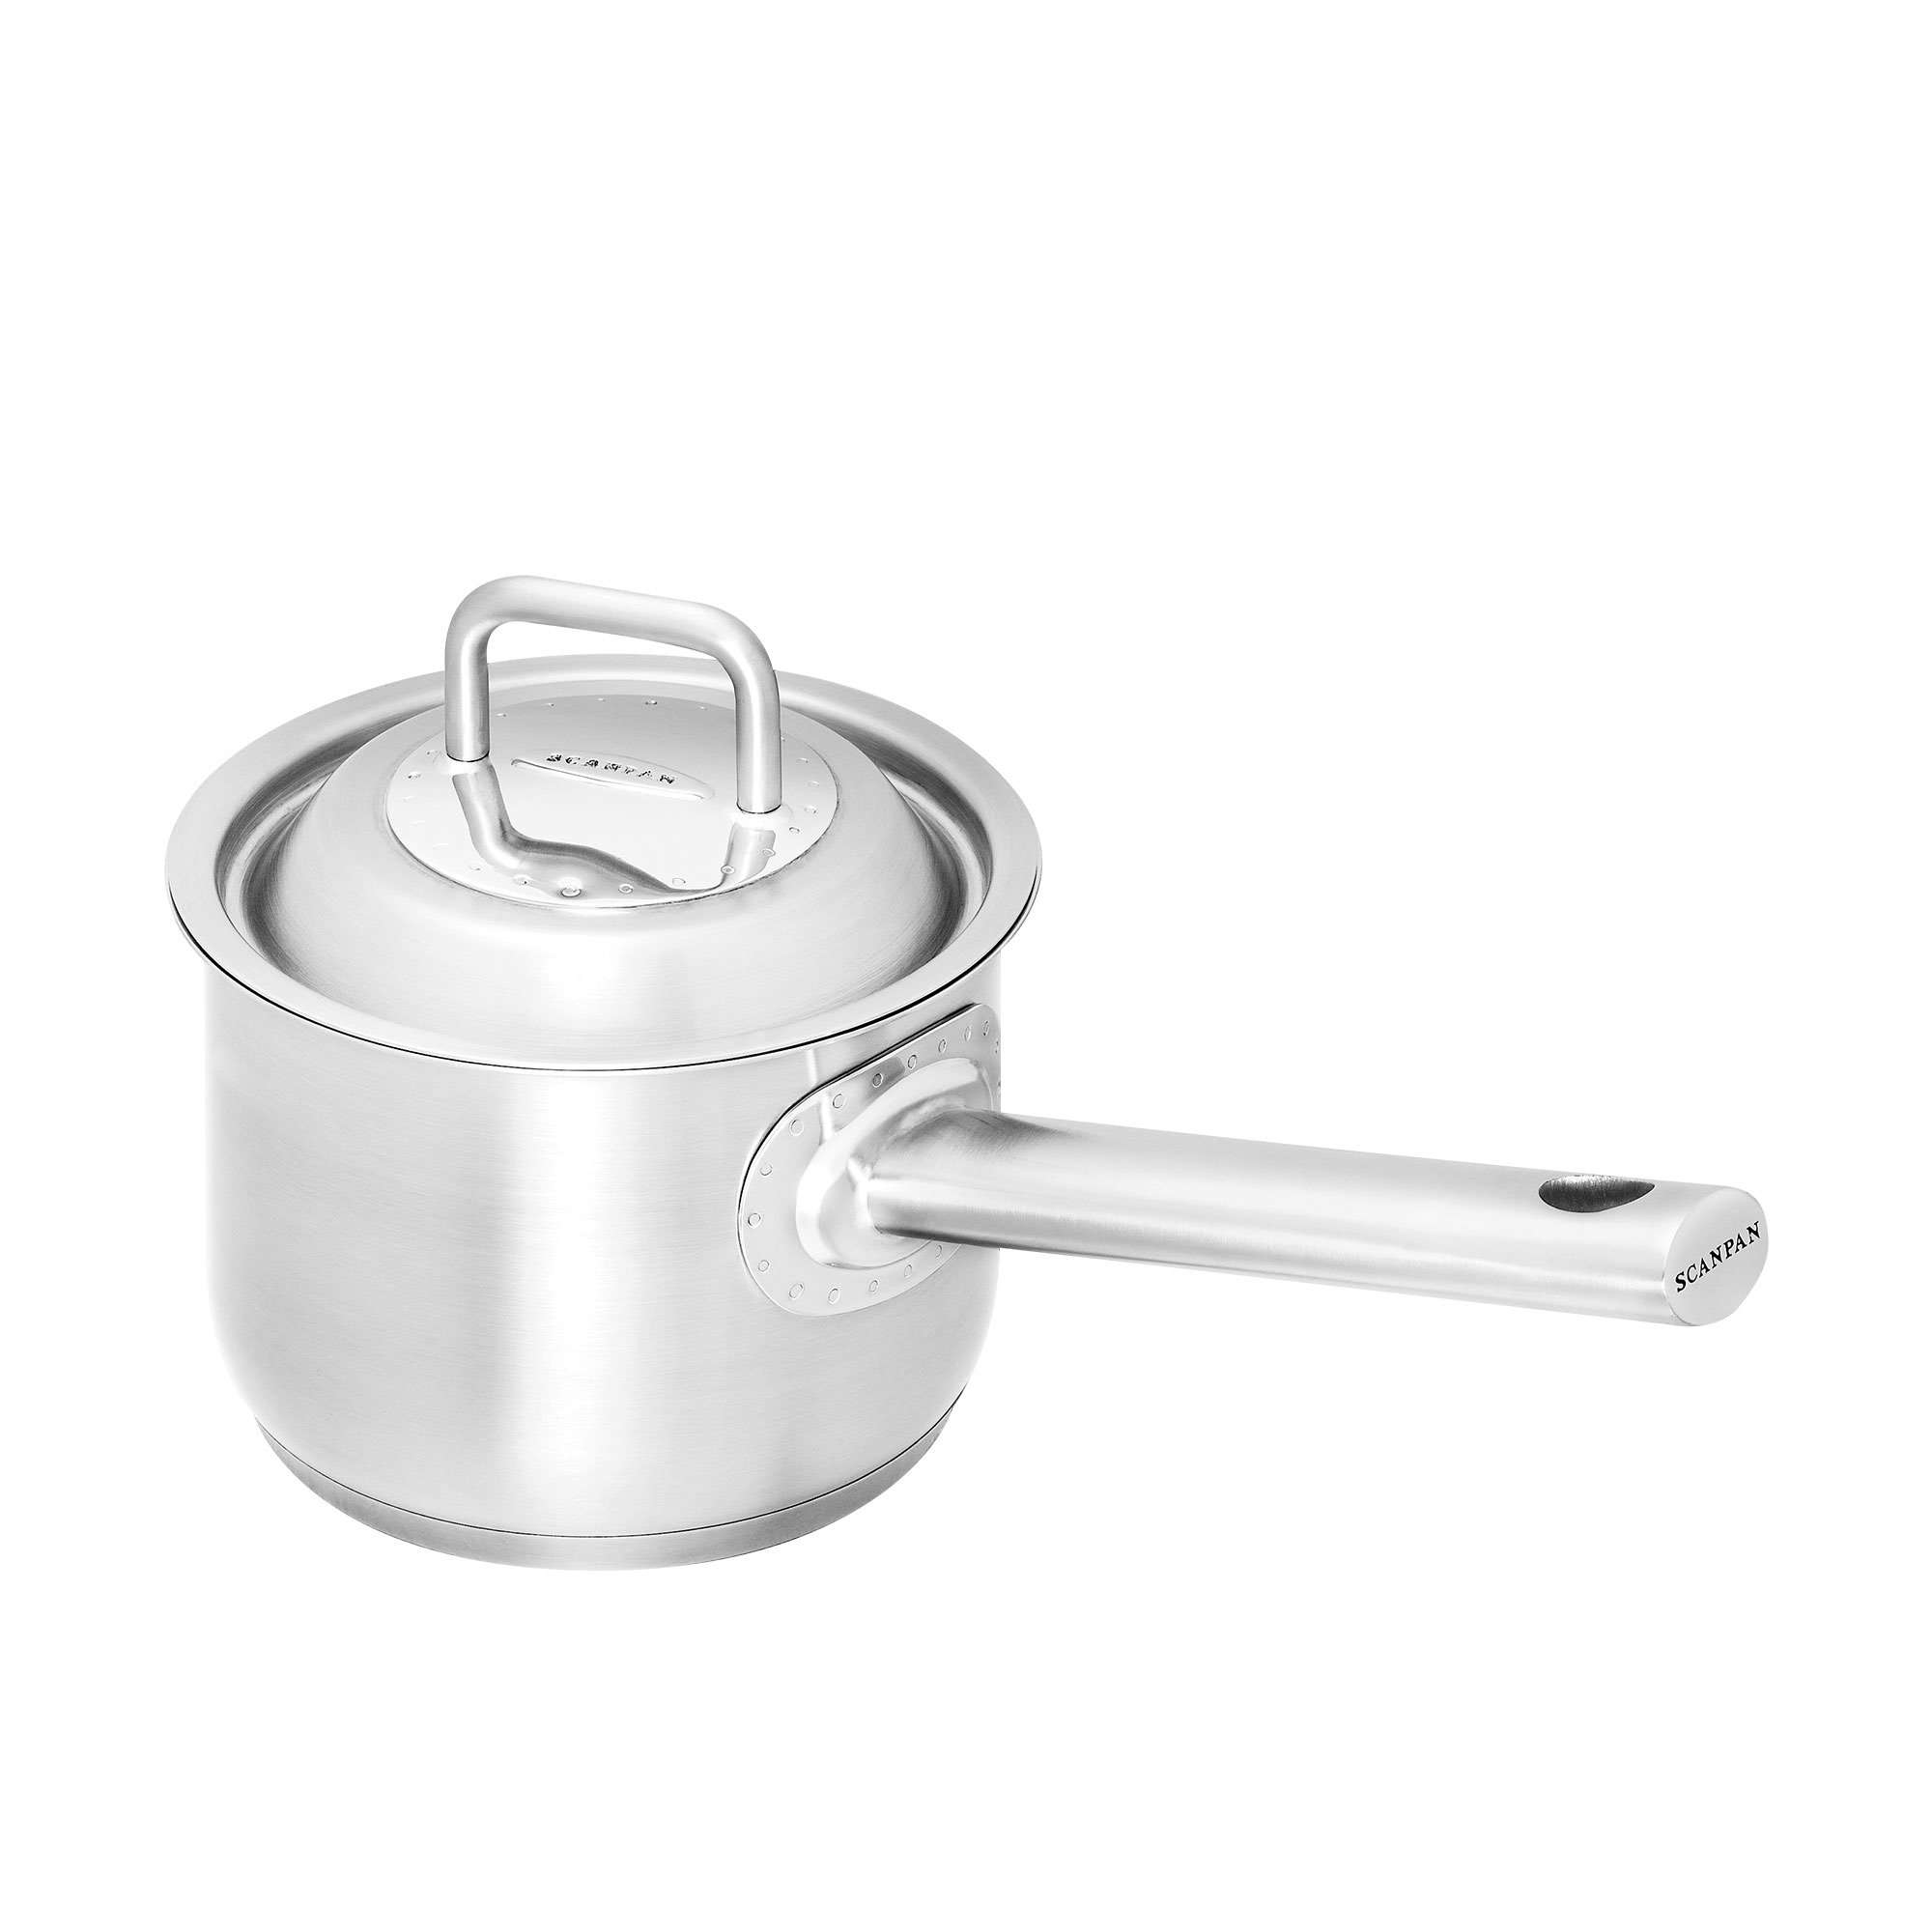 Scanpan Commercial Stainless Steel Covered Saucepan 14cm - 1.2L Image 1